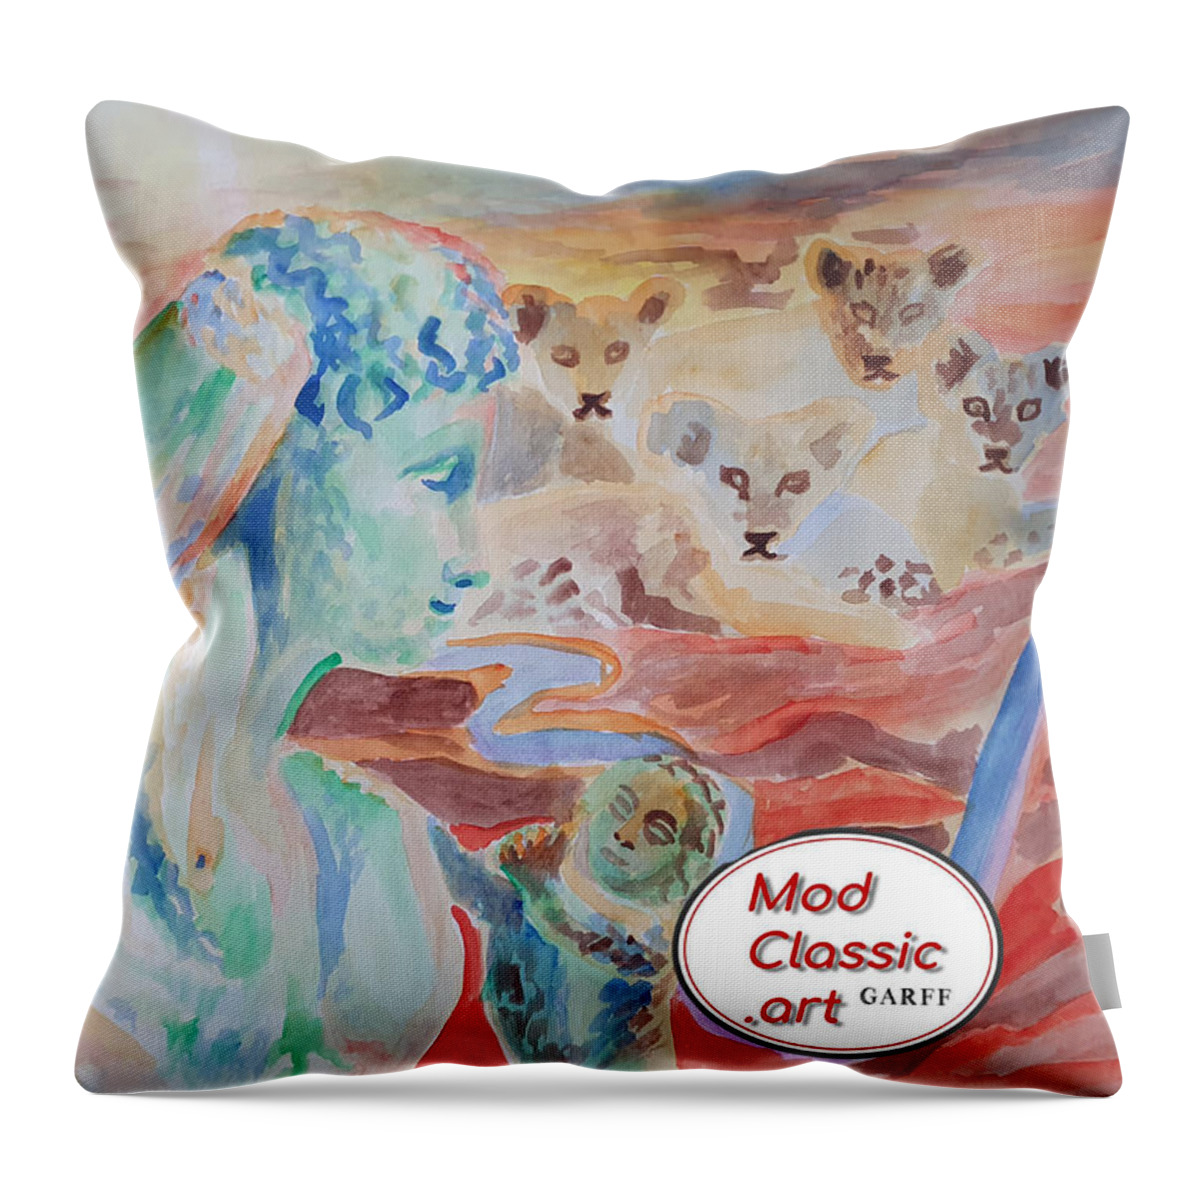 Classical Greek Sculpture Throw Pillow featuring the painting Amore and Psyche ModClassic Art by Enrico Garff